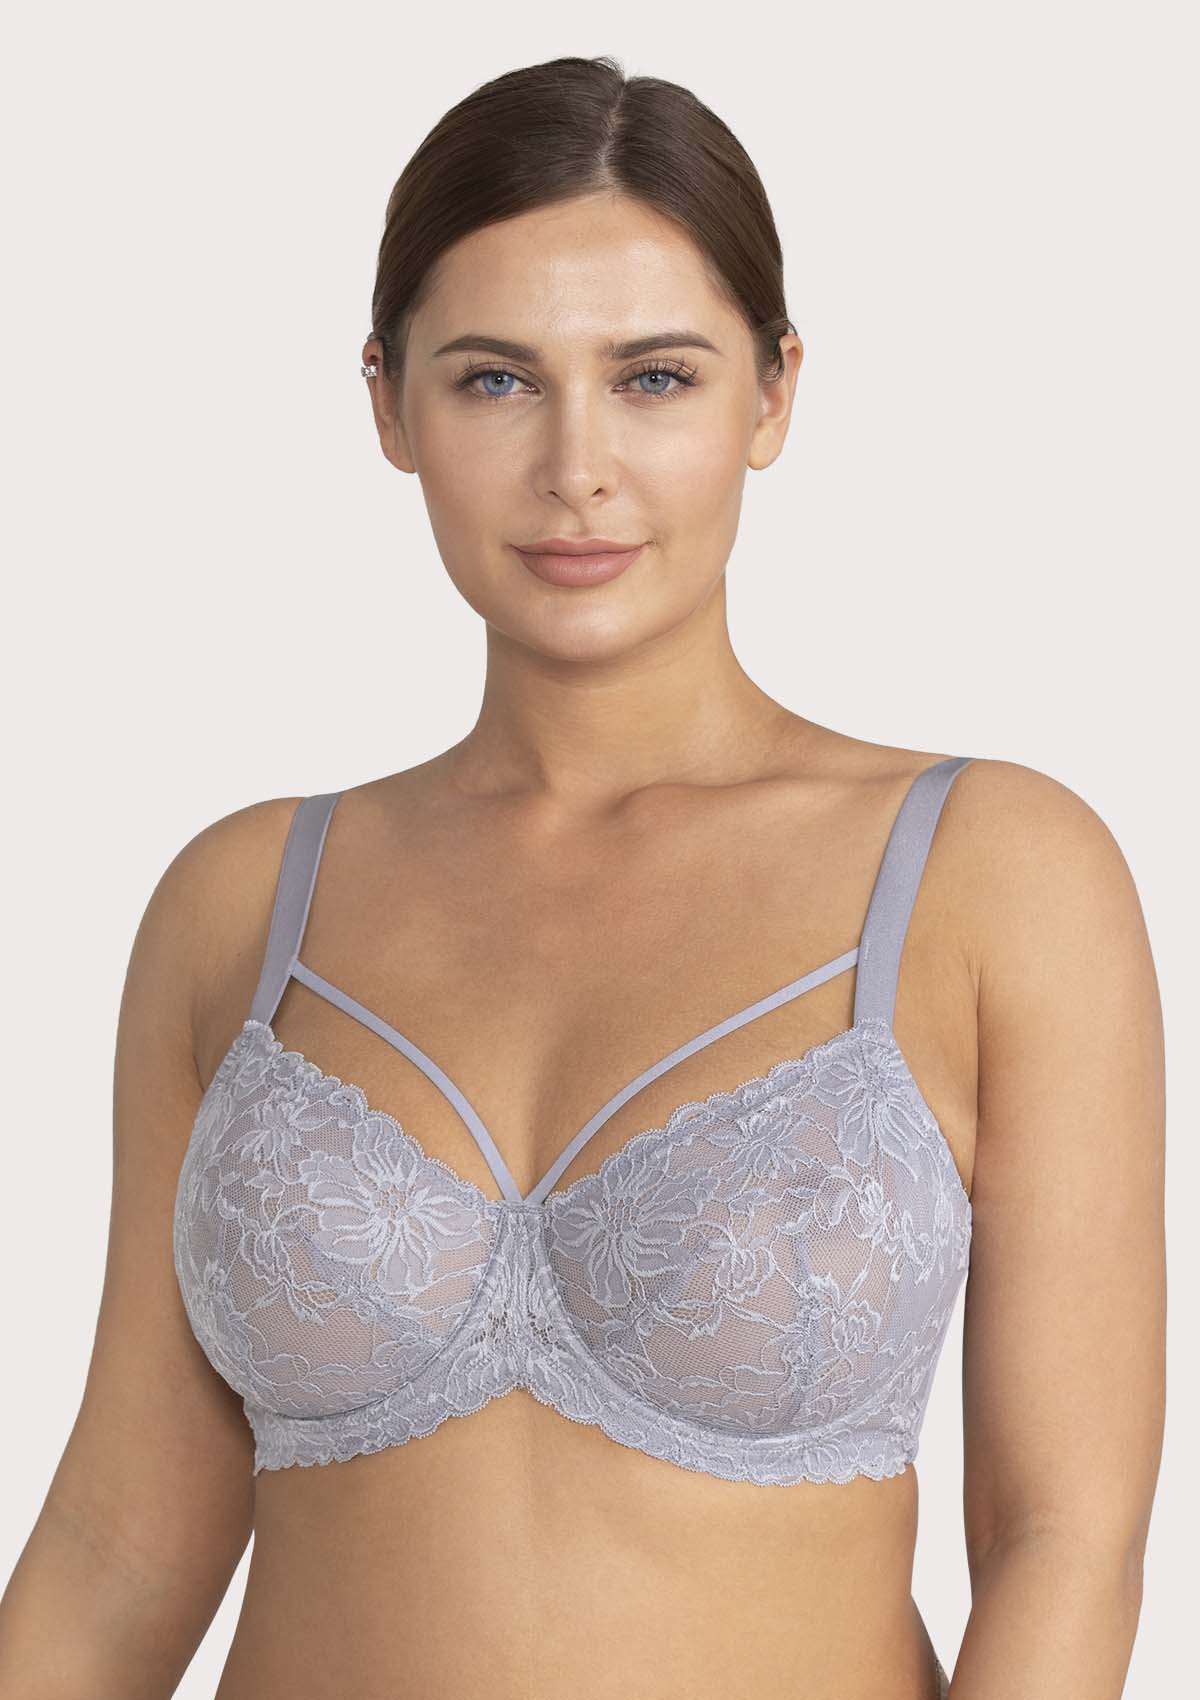 HSIA Pretty In Petals See-Through Lace Bra: Lift And Separate - Purple / 38 / C